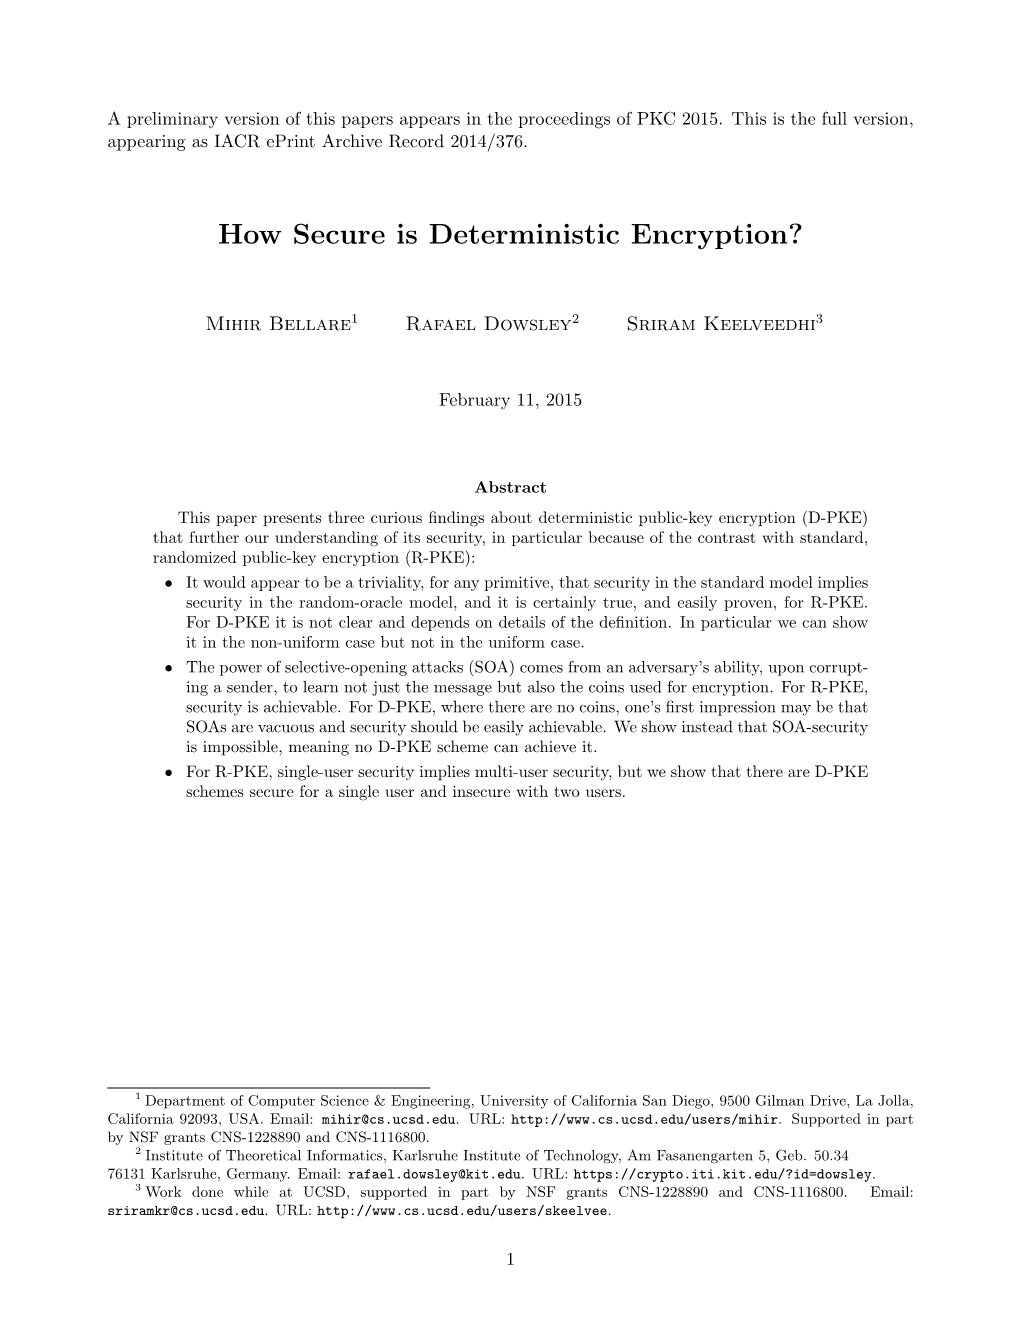 How Secure Is Deterministic Encryption?